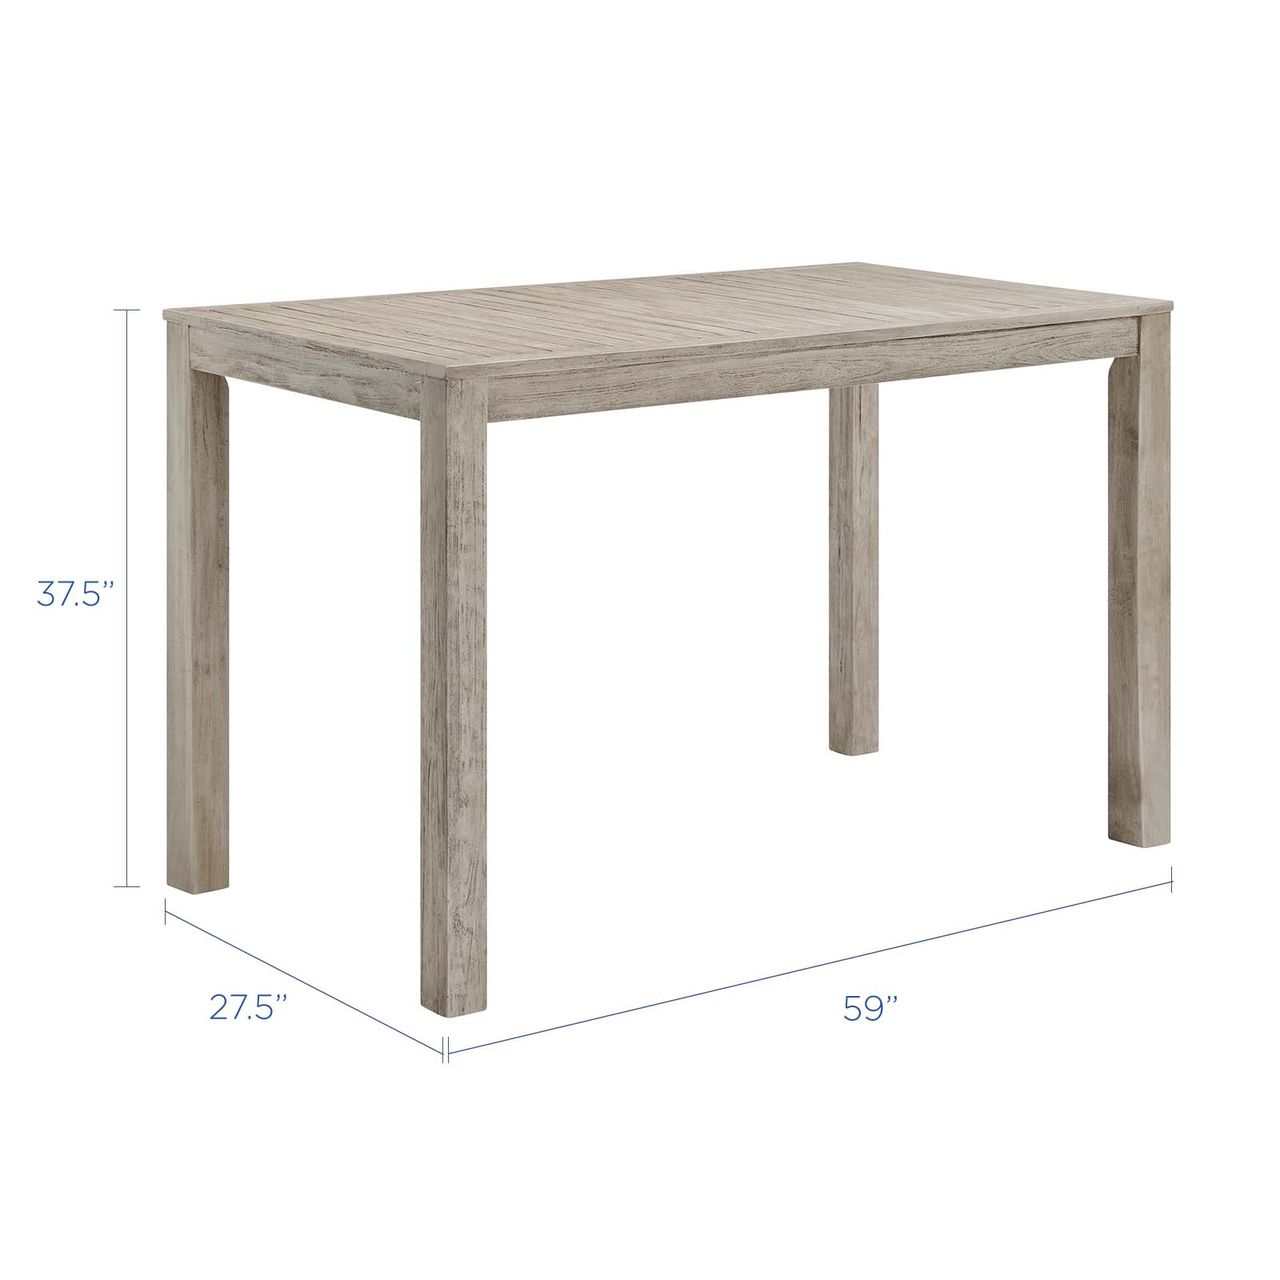 Modway Wiscasset Patio Acacia Wood Bar Table In Light Gray Finish EEI-3686-LGR - image 2 of 2